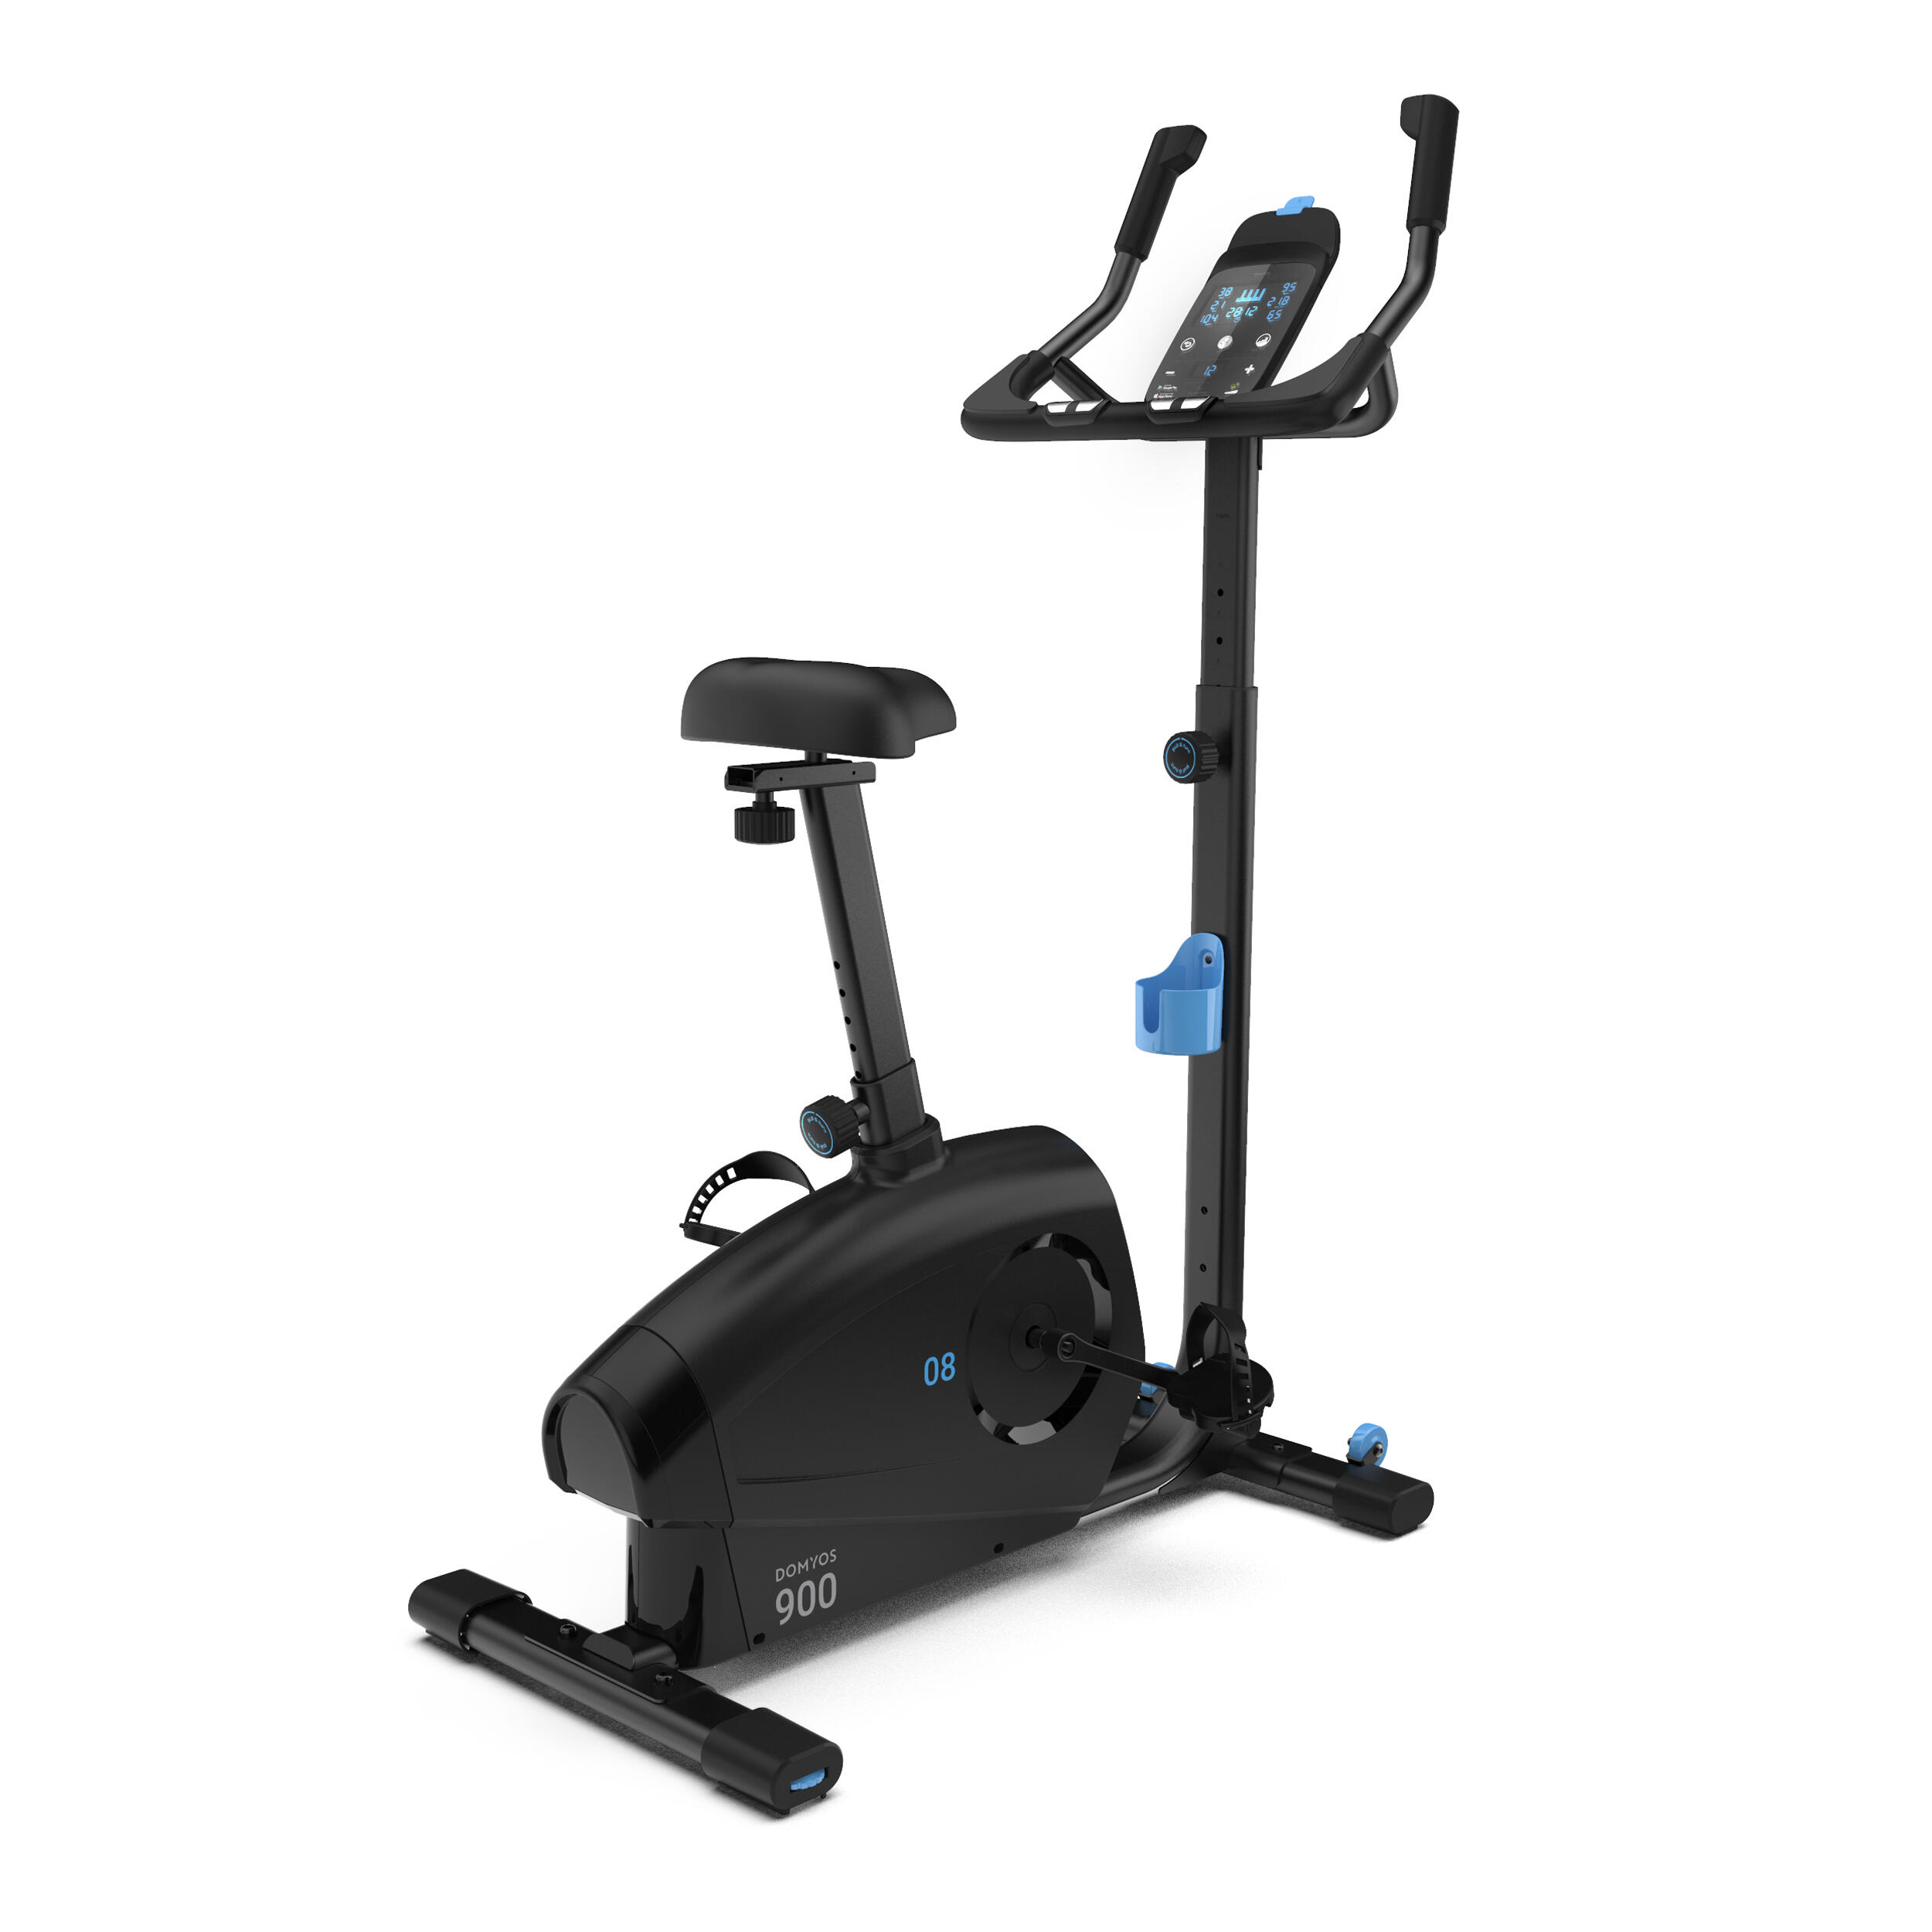 Self-Powered Exercise Bike 900 Connected to Coaching Apps 1/7